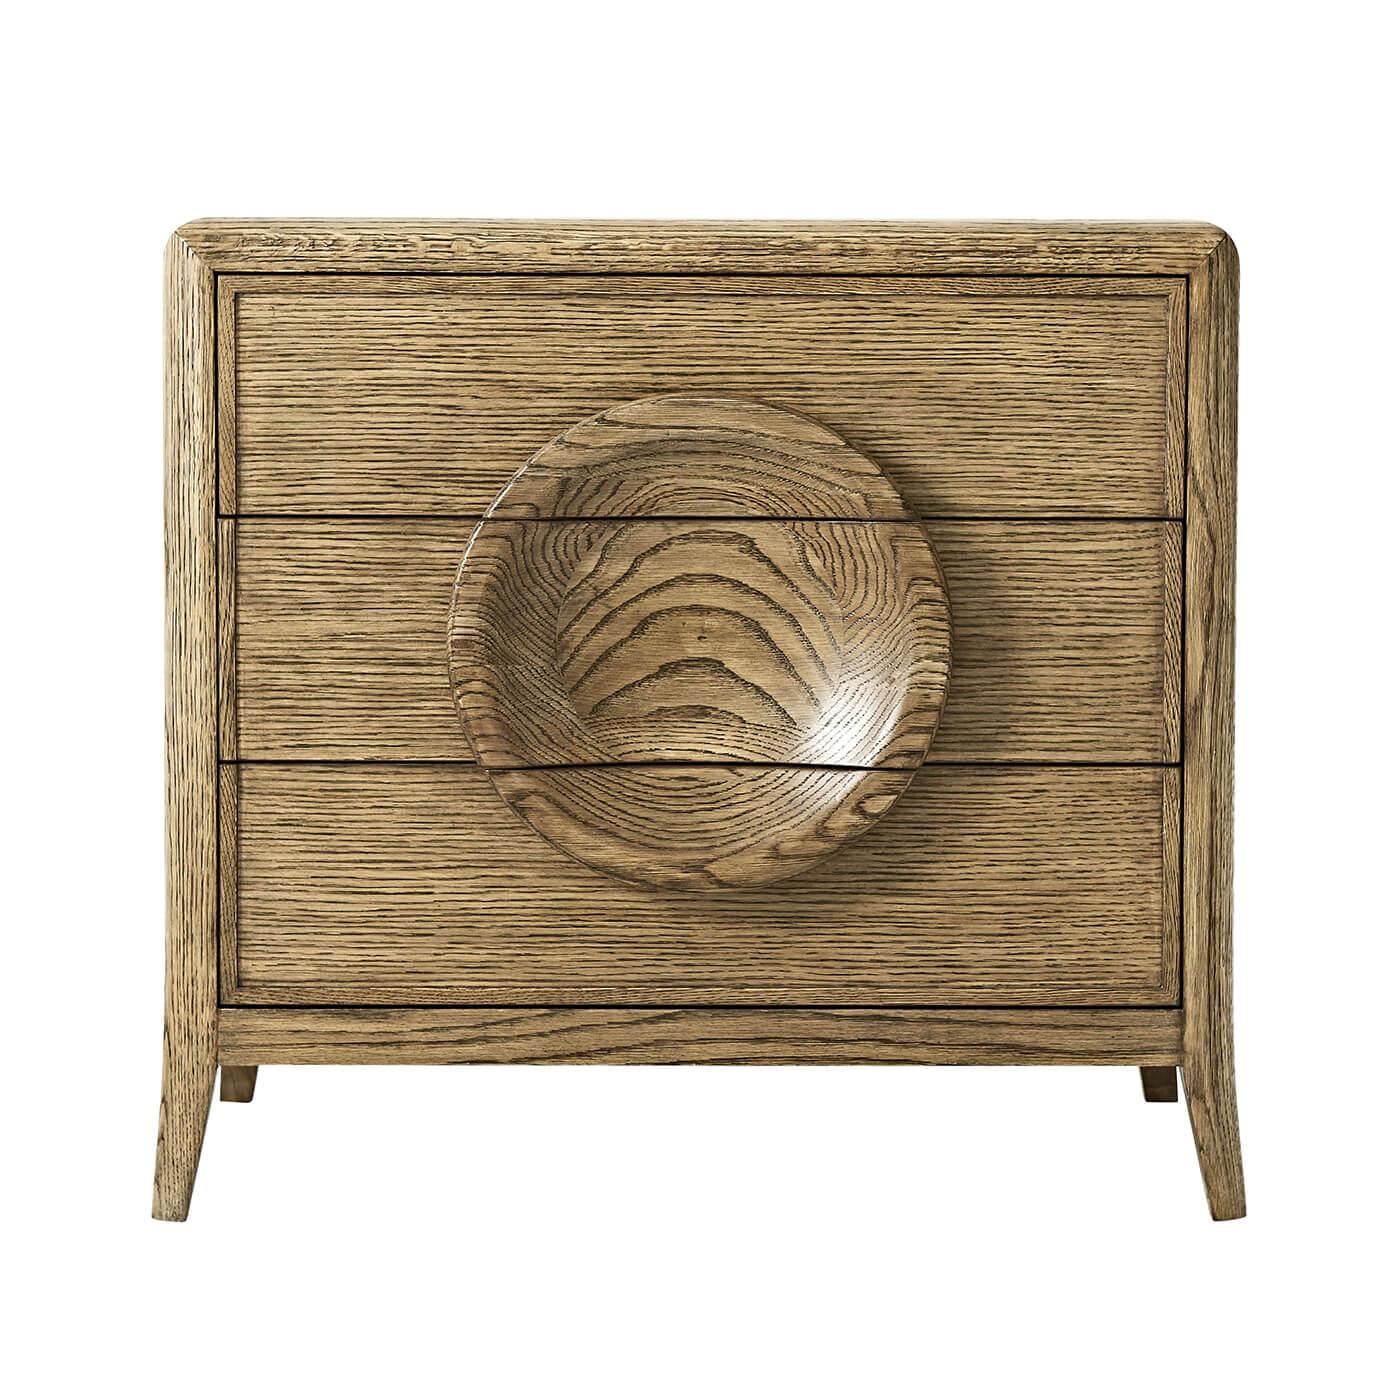 A Mid-Century Modern style solid oak and quarter oak veneered 3 - drawer nightstand. With dish form decorative drawer pulls and splayed legs. The self-closing drawers are lined on the bottoms with felt.

Dimensions: 28.5